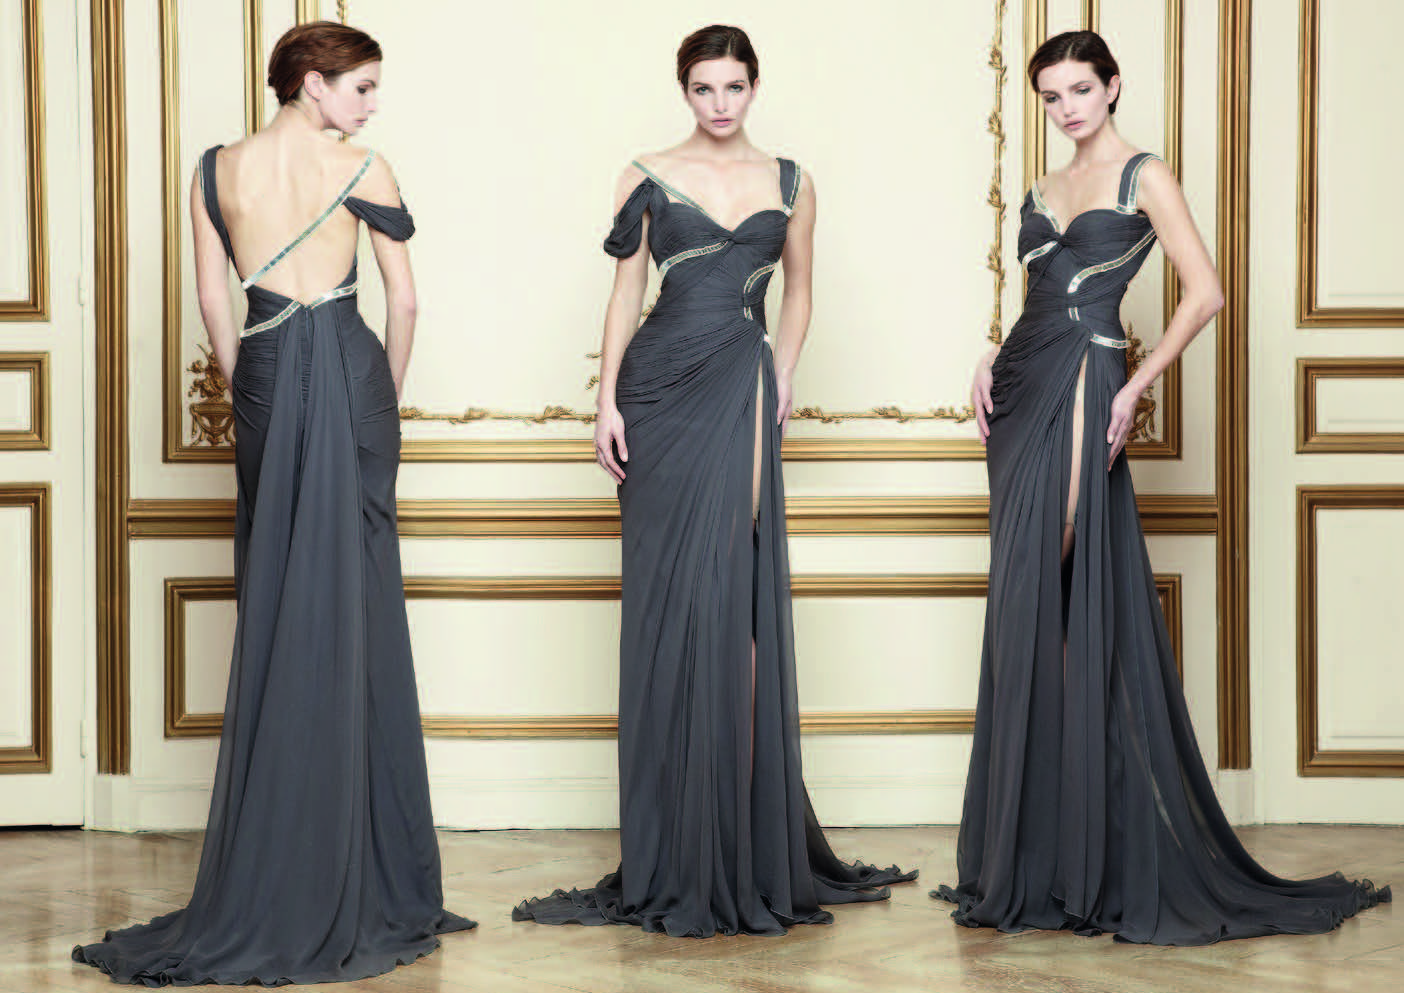 Glamorous Evening Dresses For Your Special Date